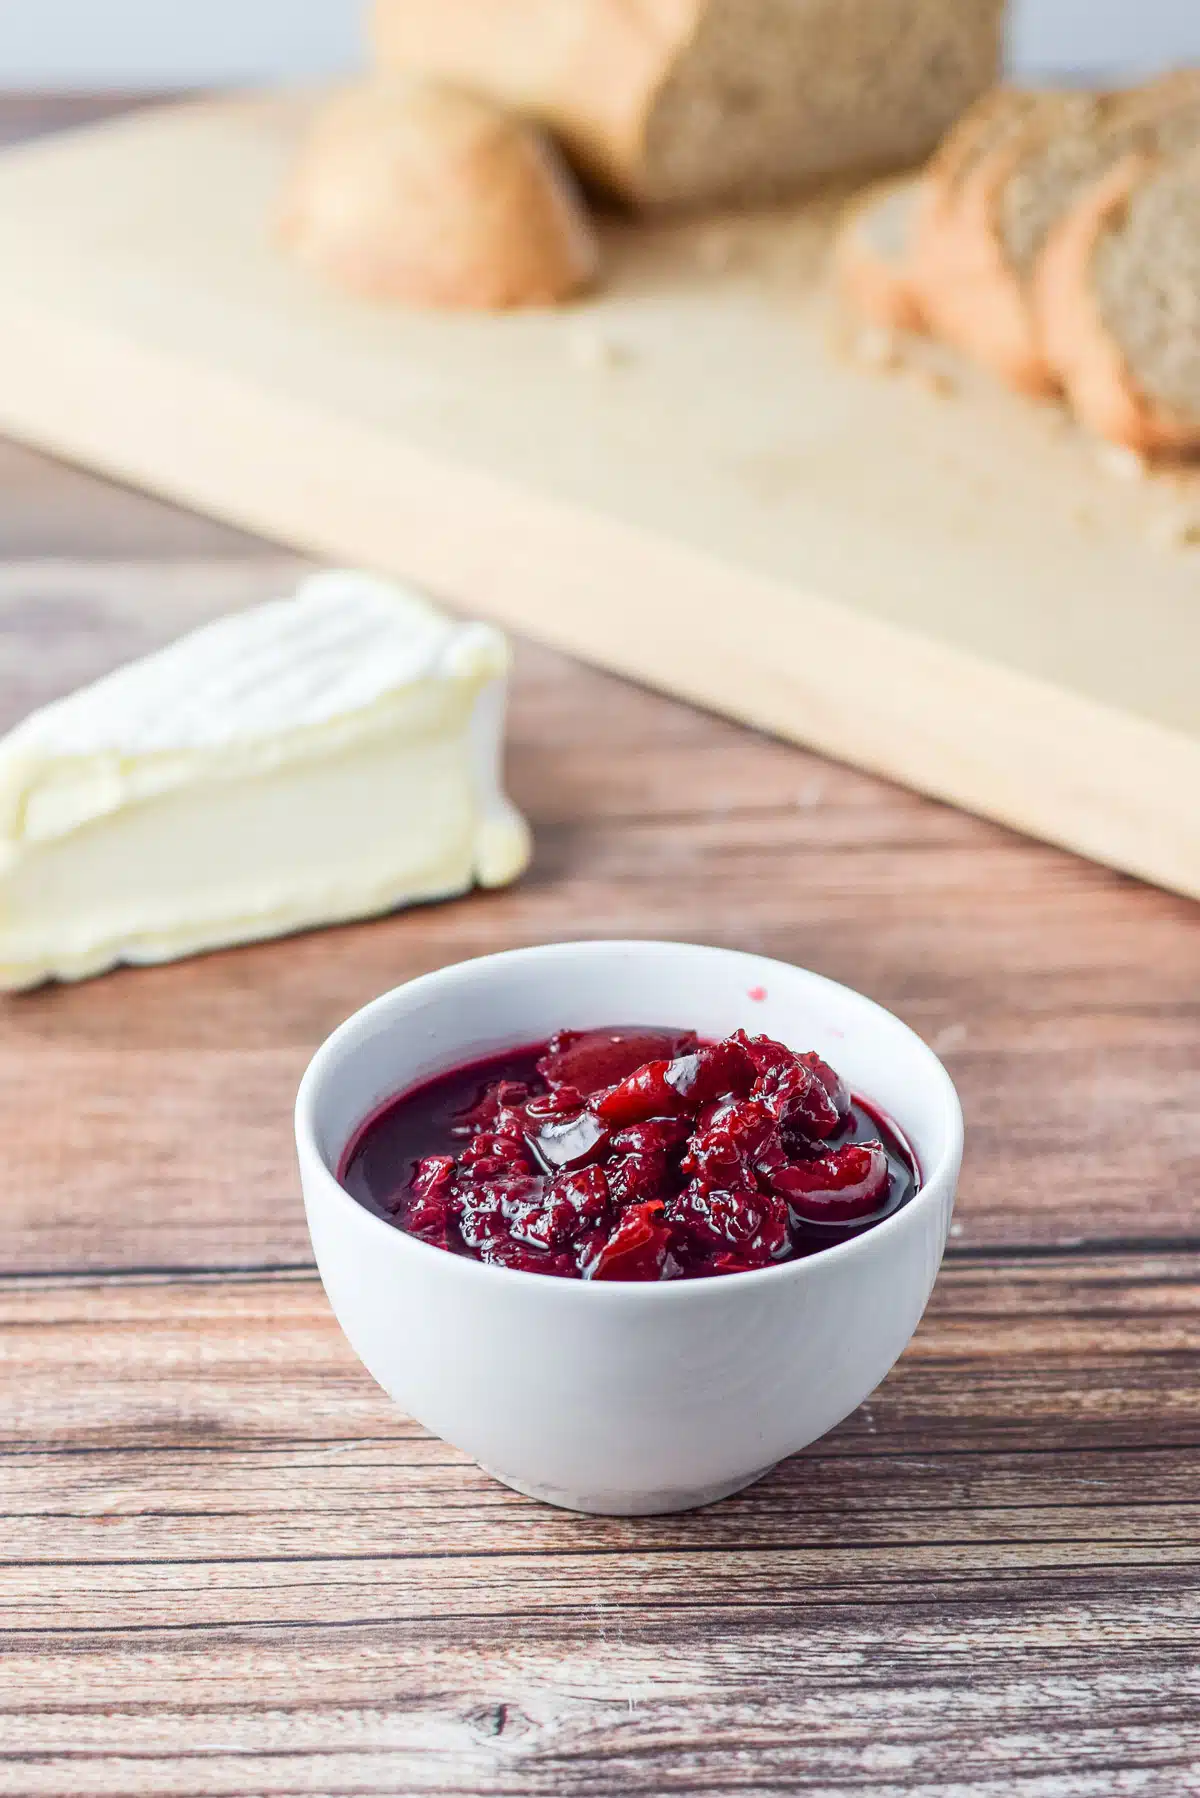 Cherry sauce in a bowl, camembert and bread on a wooden board